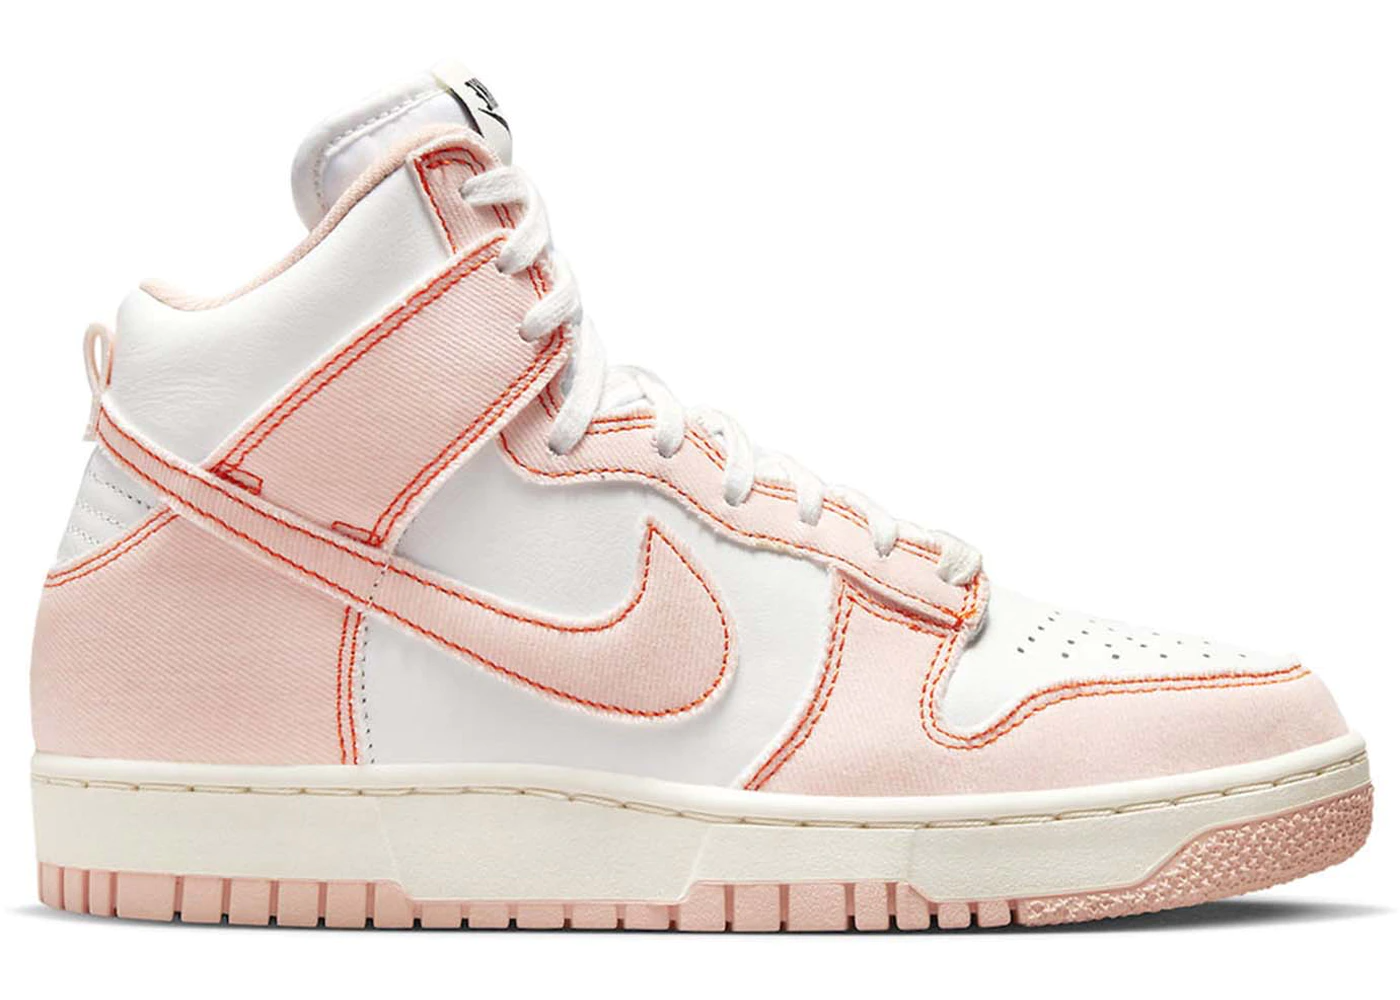 Now Available: Nike Dunk High 1985 (W) 